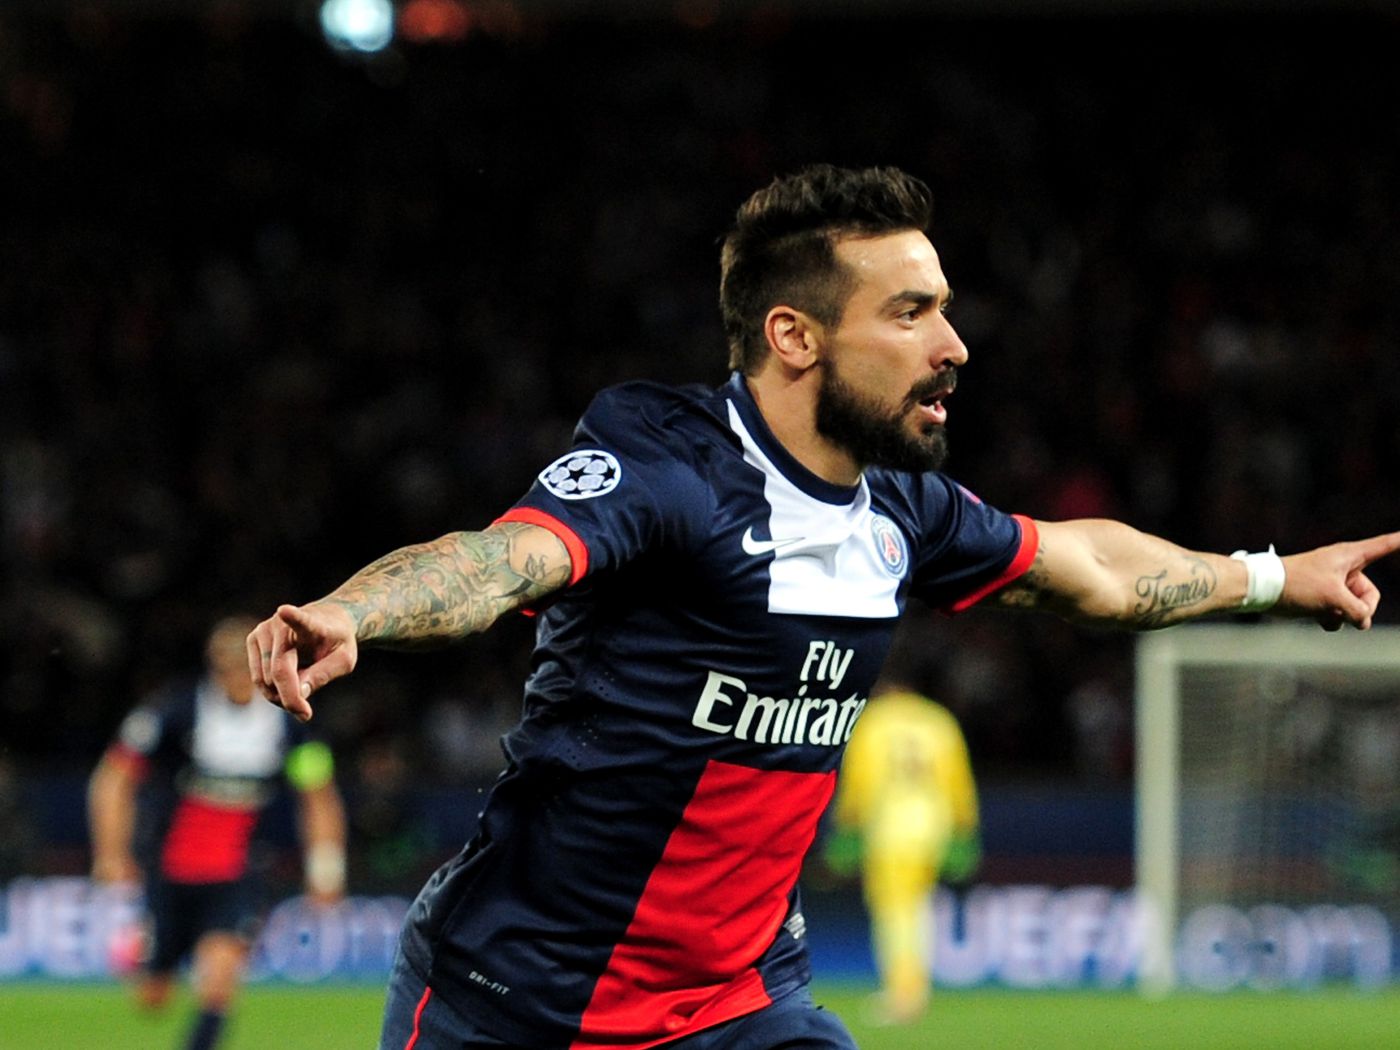 Next Up In The Great Chelsea PSG Switcharoo: Ezequiel Lavezzi Ain't Got No History